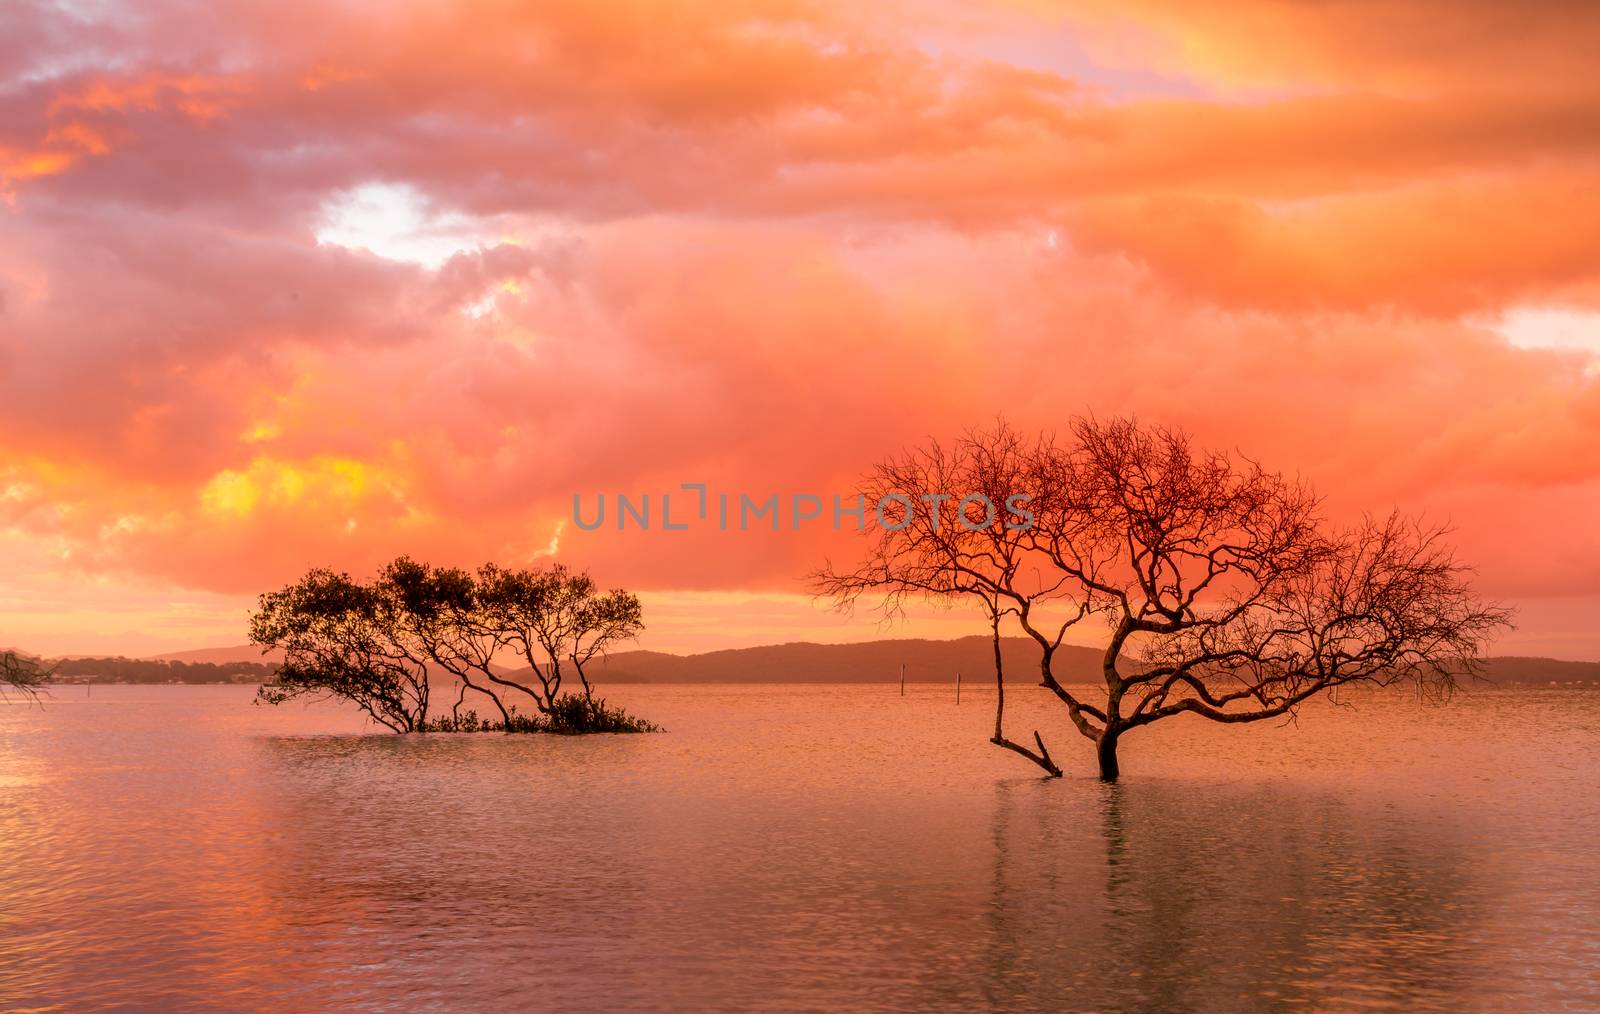 Sunset and storm clouds over mangroves by lovleah